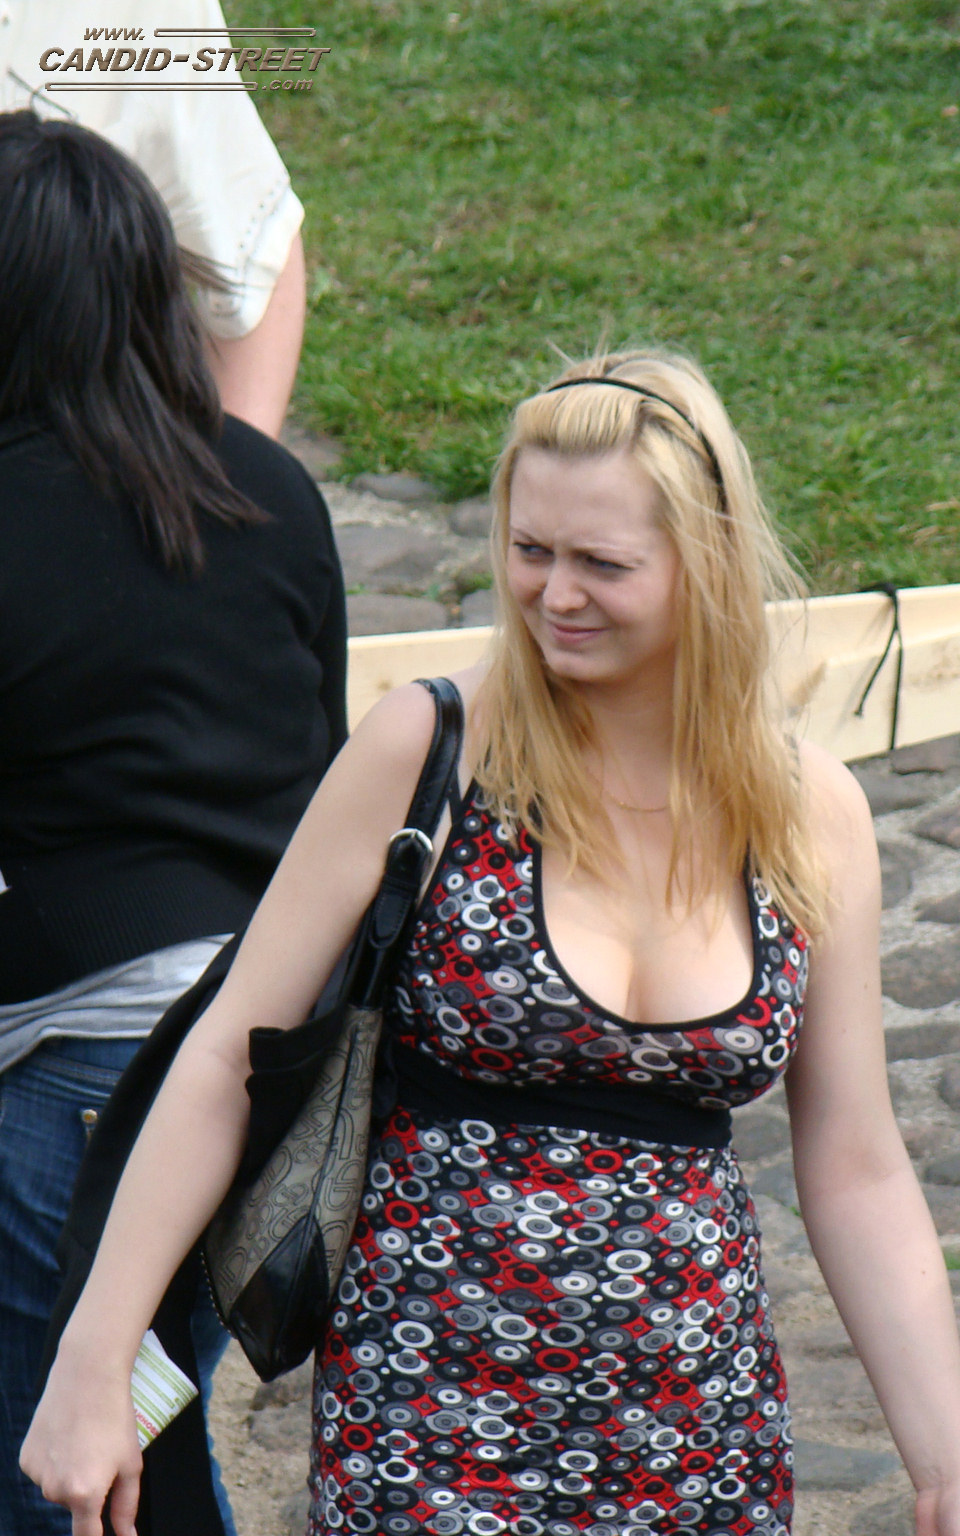 Busty girls candid shots - 12-dsc06597 from Candid Street